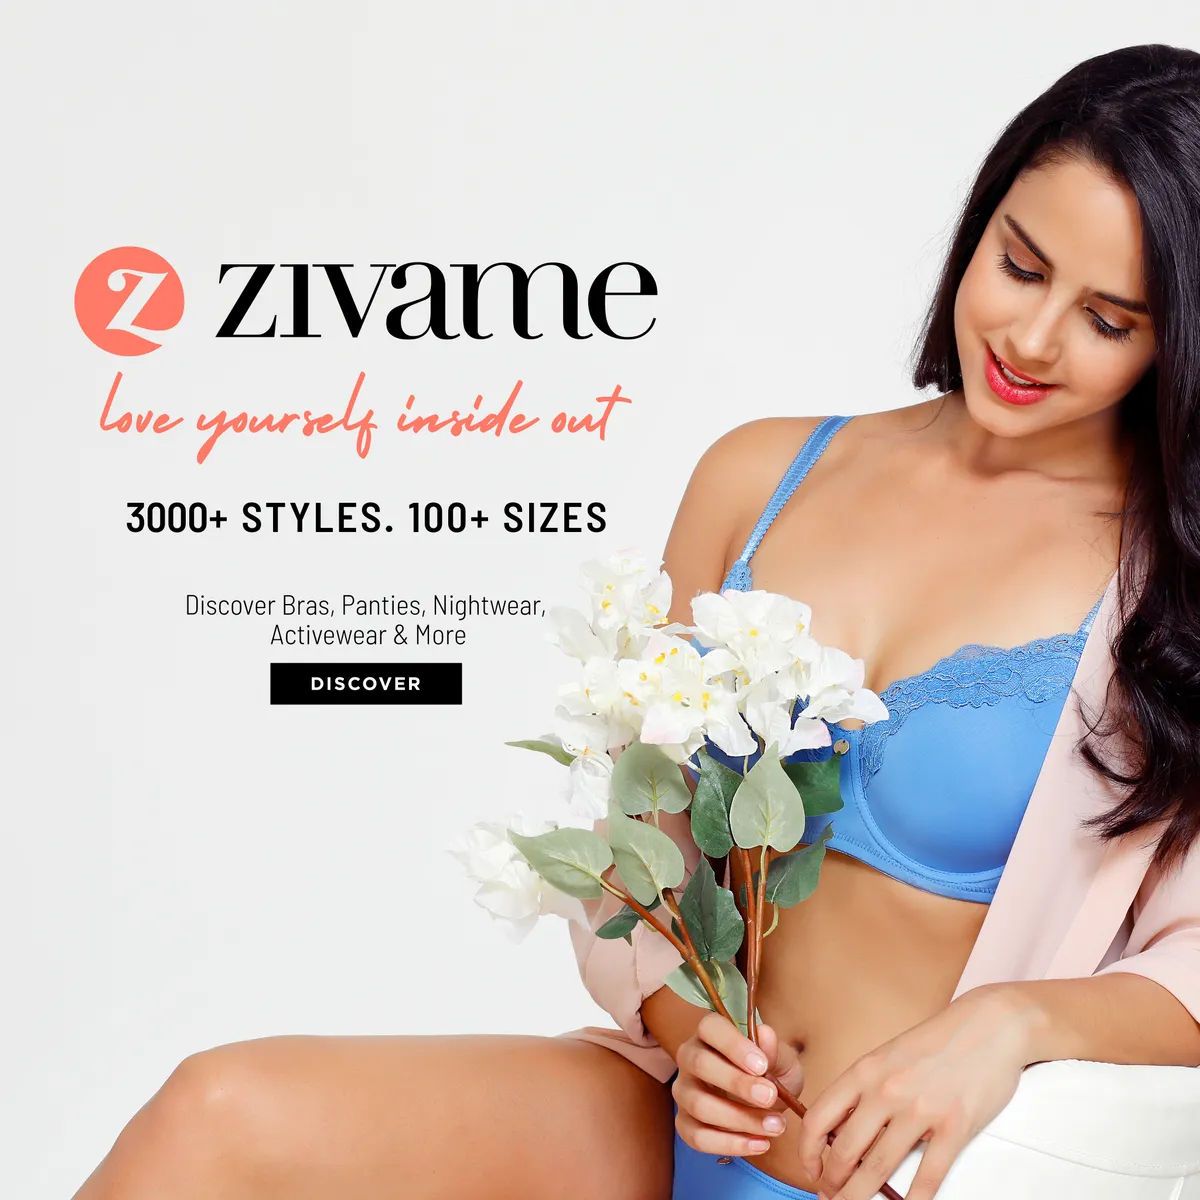 Discover bras Size 80C to create the cleavage of your dreams